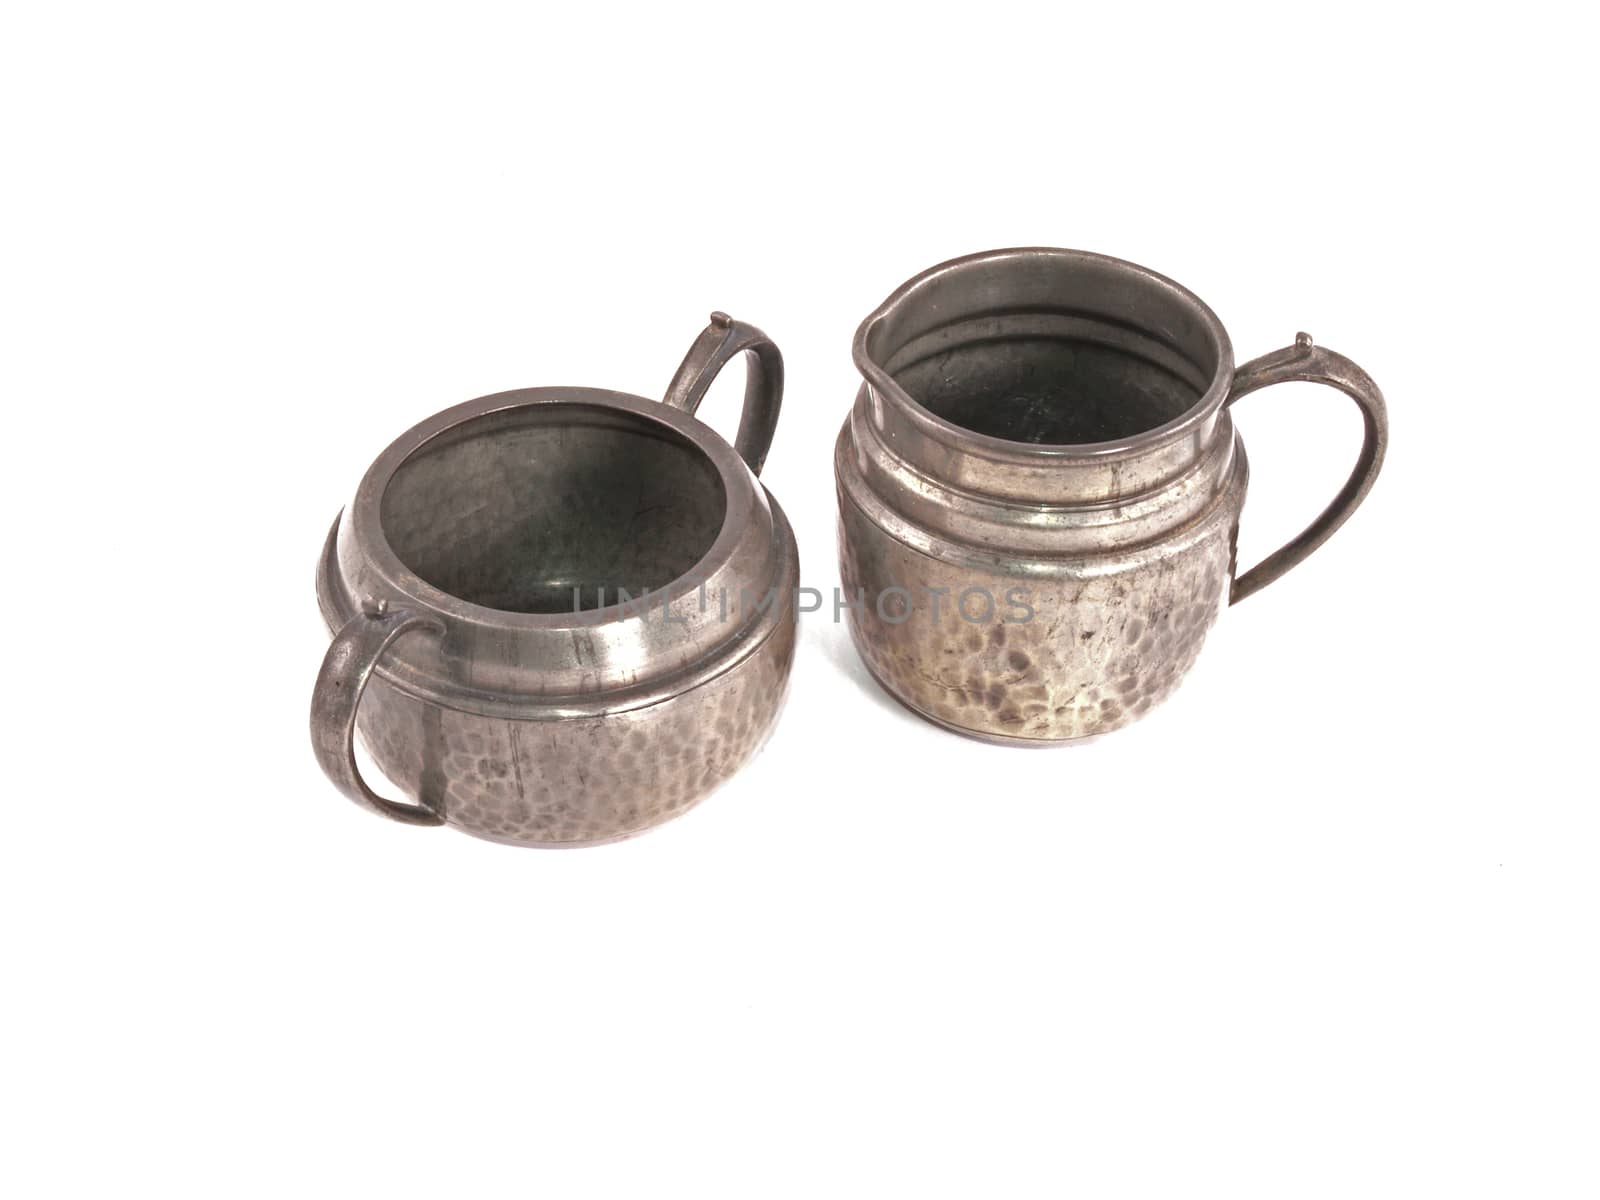 Pewter sugar bowl and milk jug on a white background.